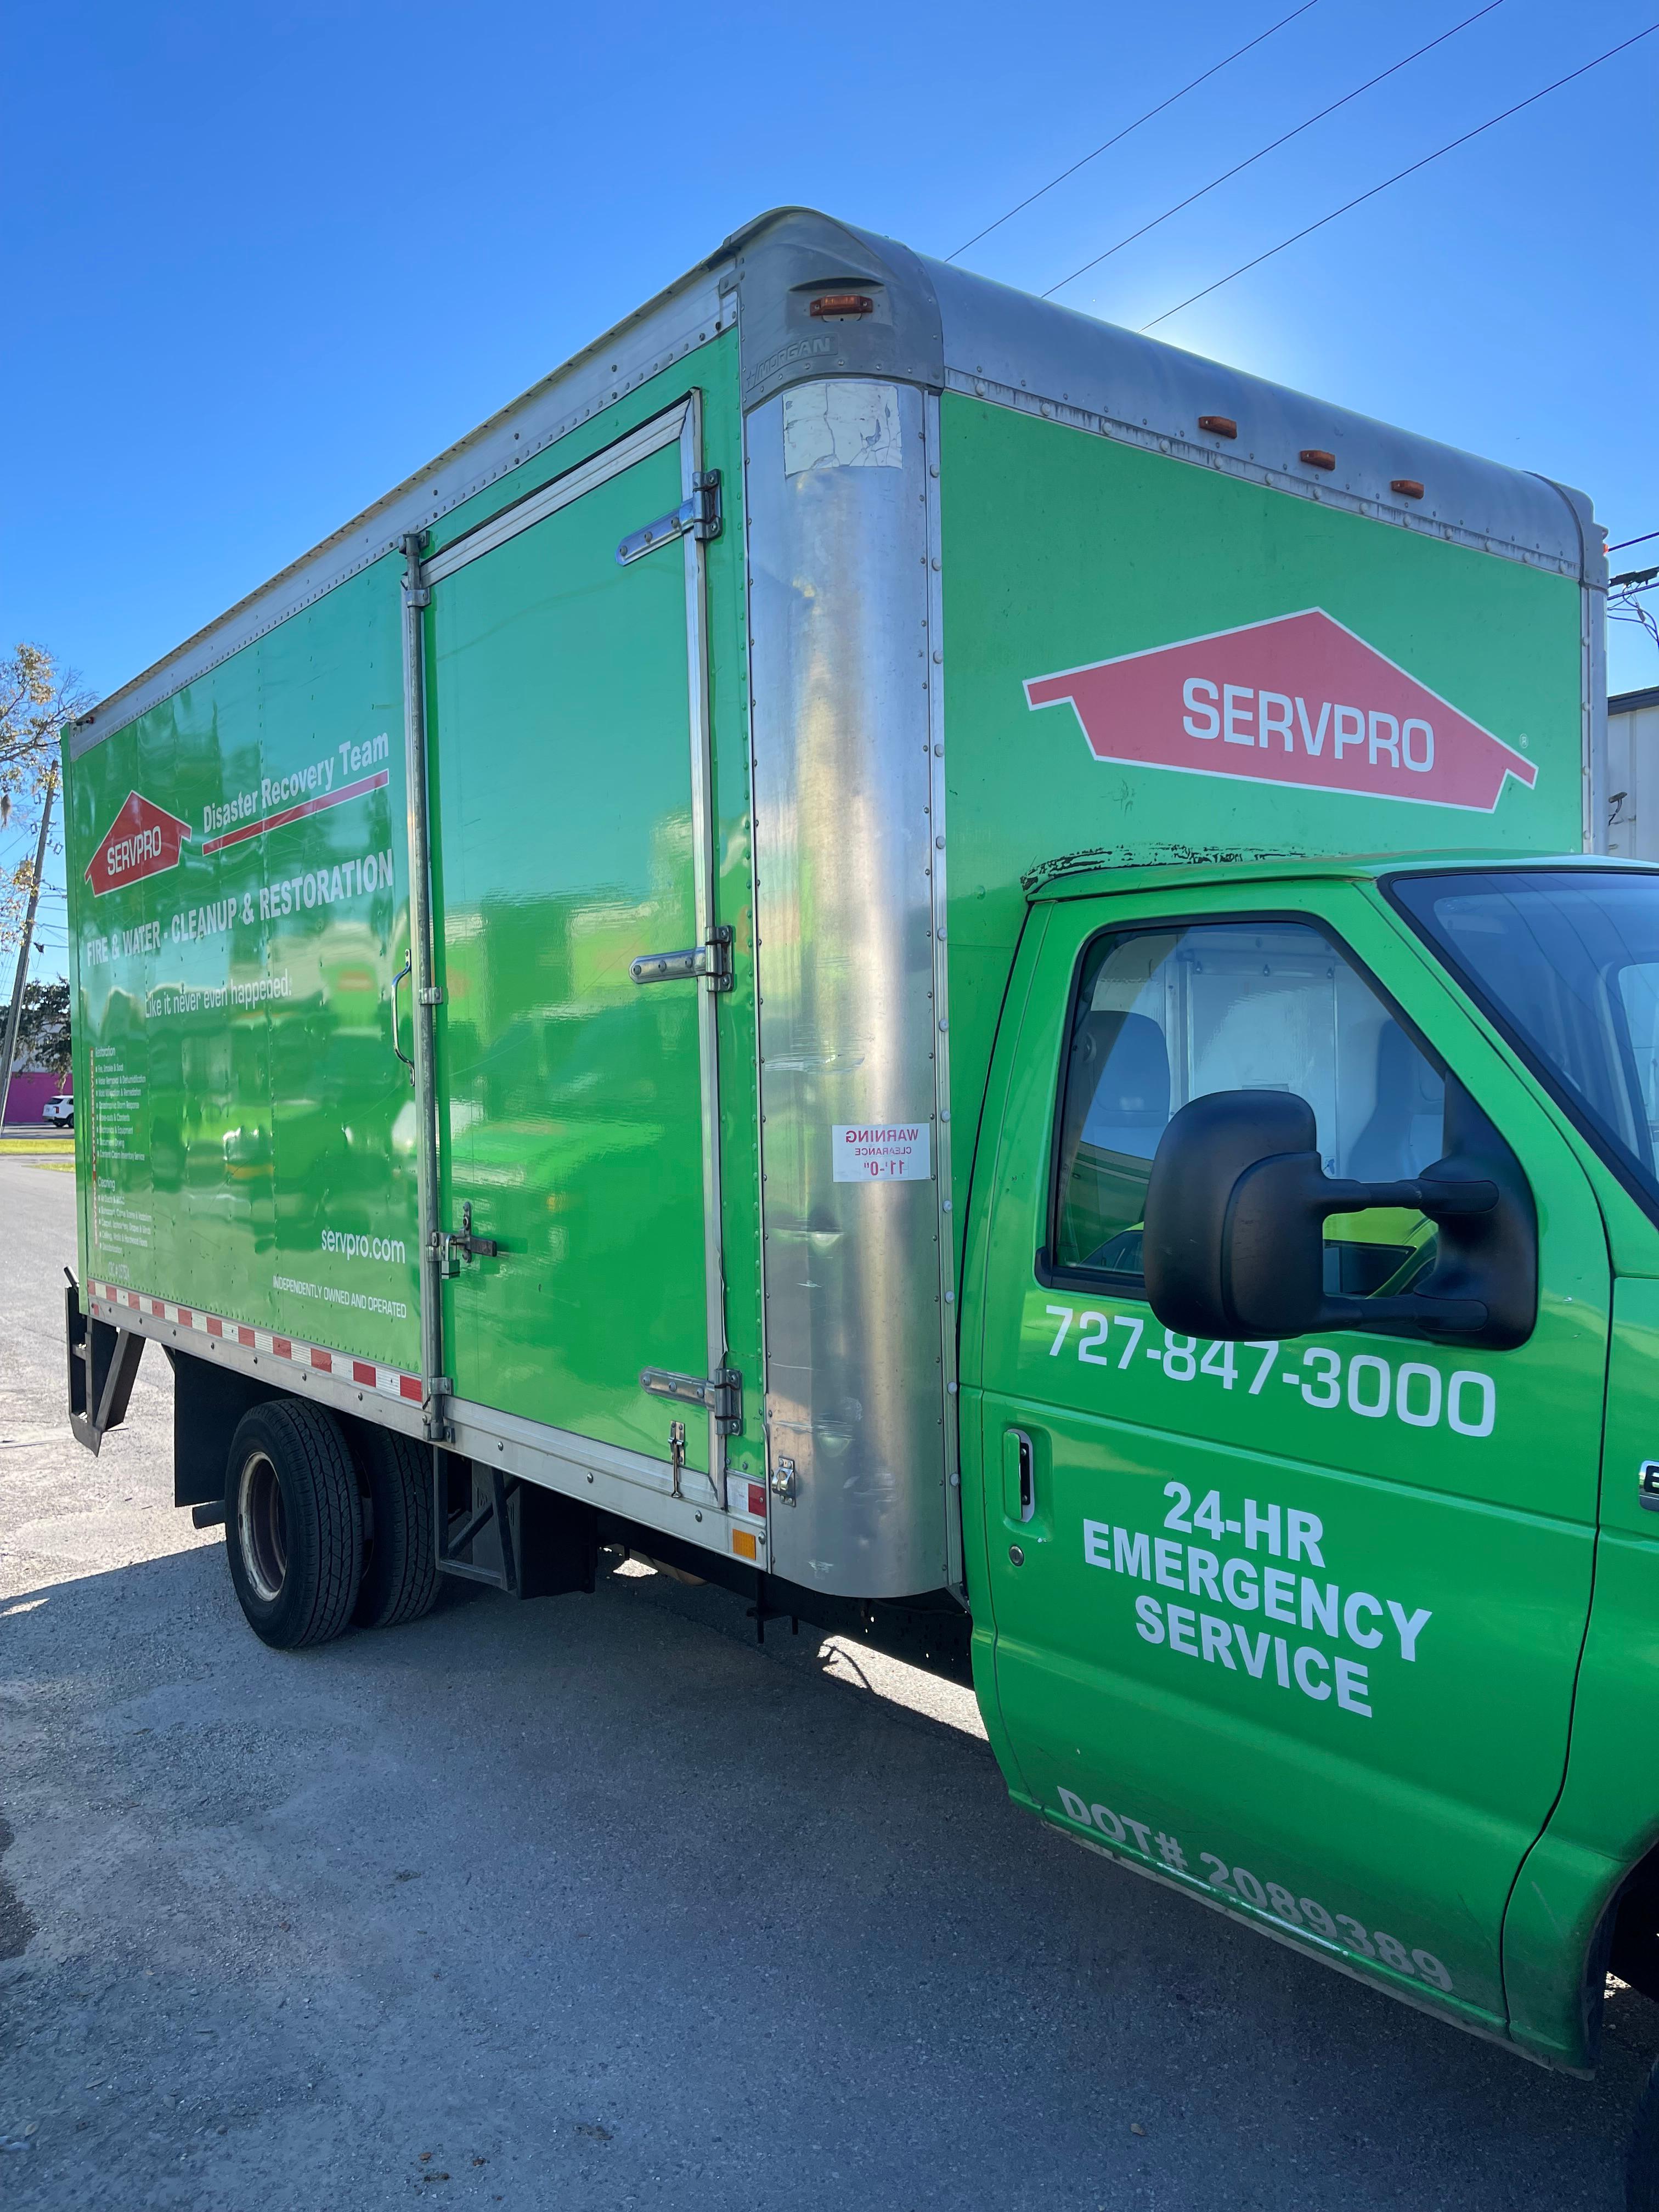 SERVPRO box truck ready for dispatch